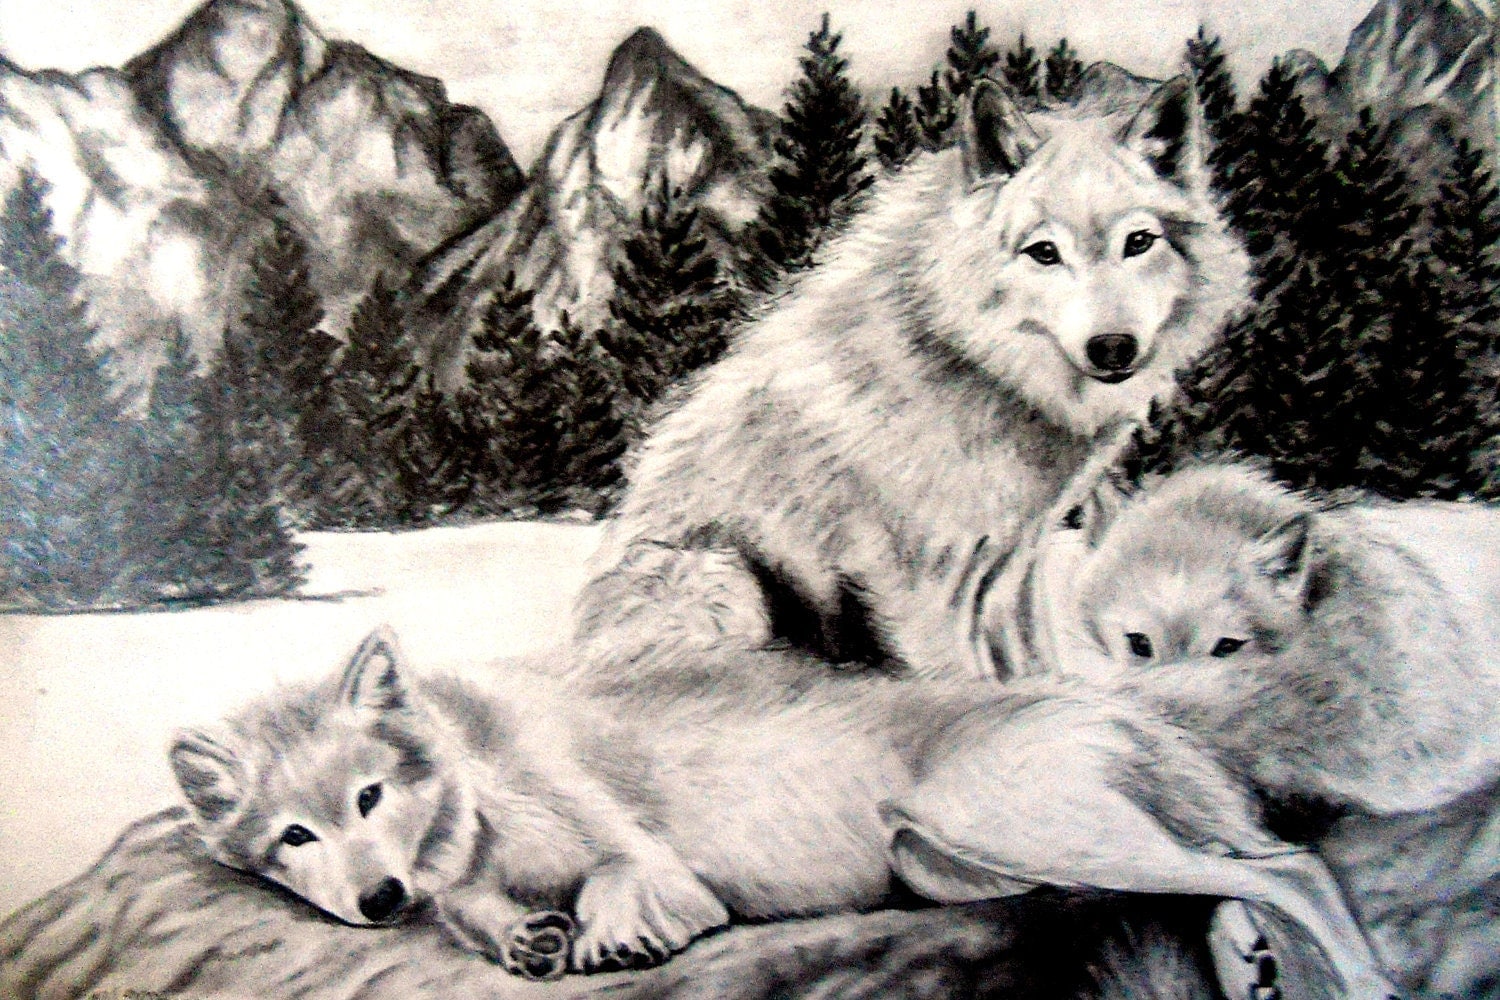 Drawing of Three Wolves in Pencil 8x10 Inches Mat Included